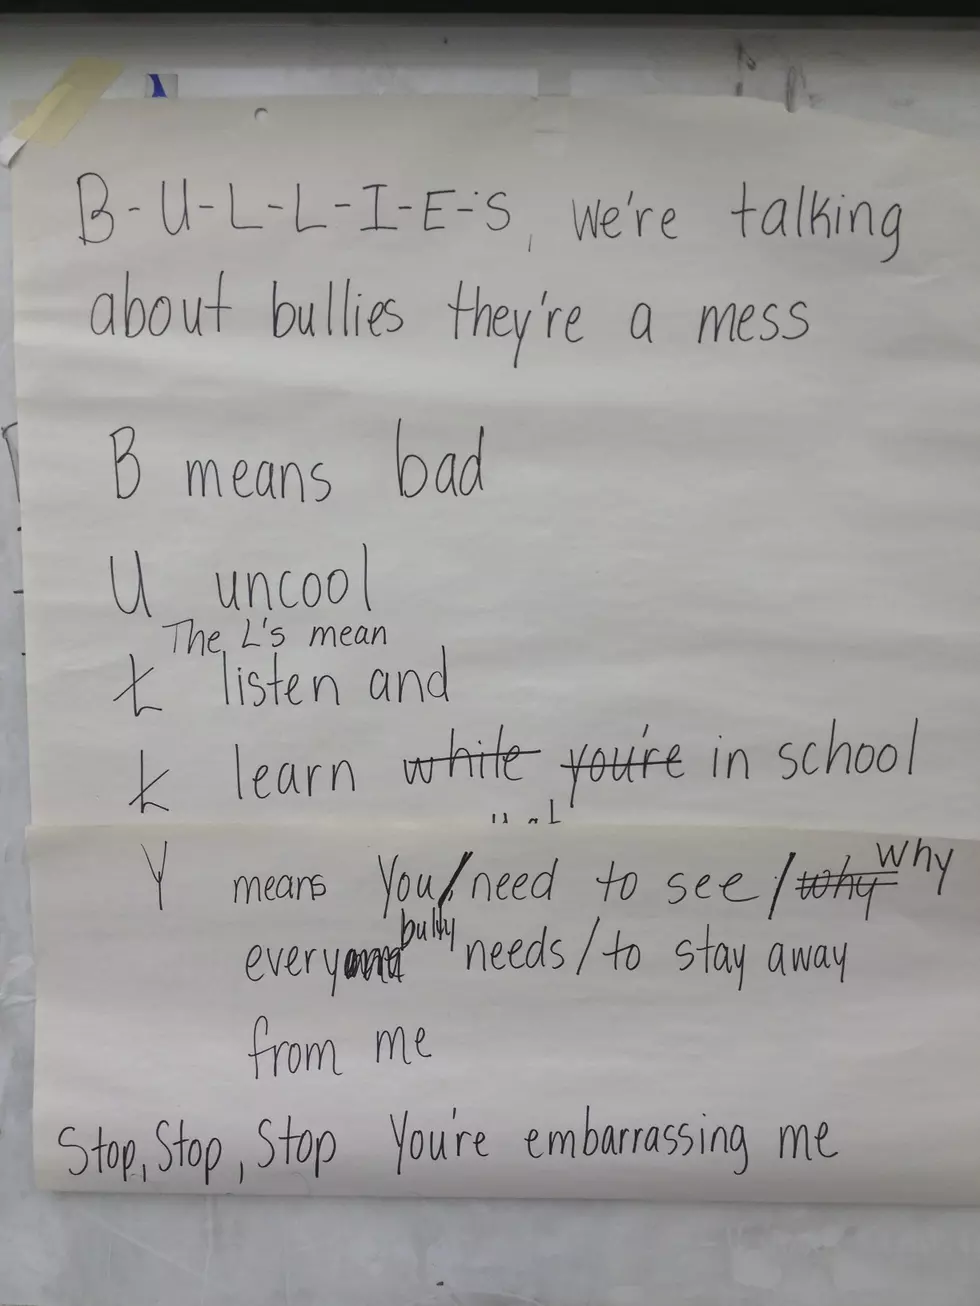 Should Parents Be Fined For Bullying Kids?  Monona, Wisconsin Officials Say “Yes”